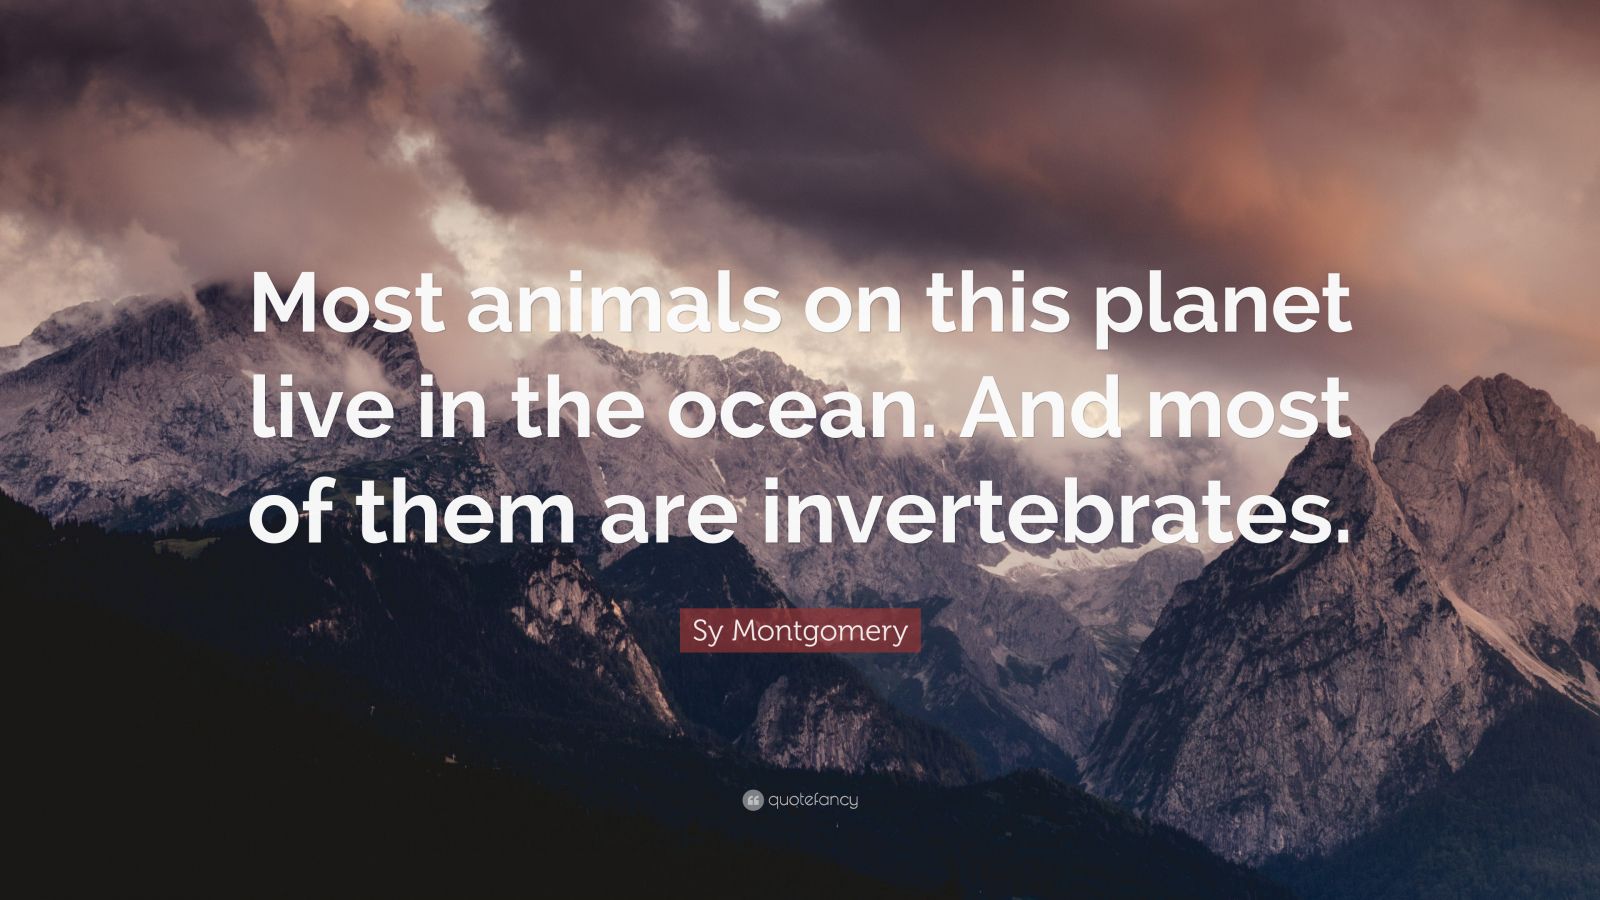 Sy Montgomery Quote: “Most animals on this planet live in the ocean. And  most of them are invertebrates.”